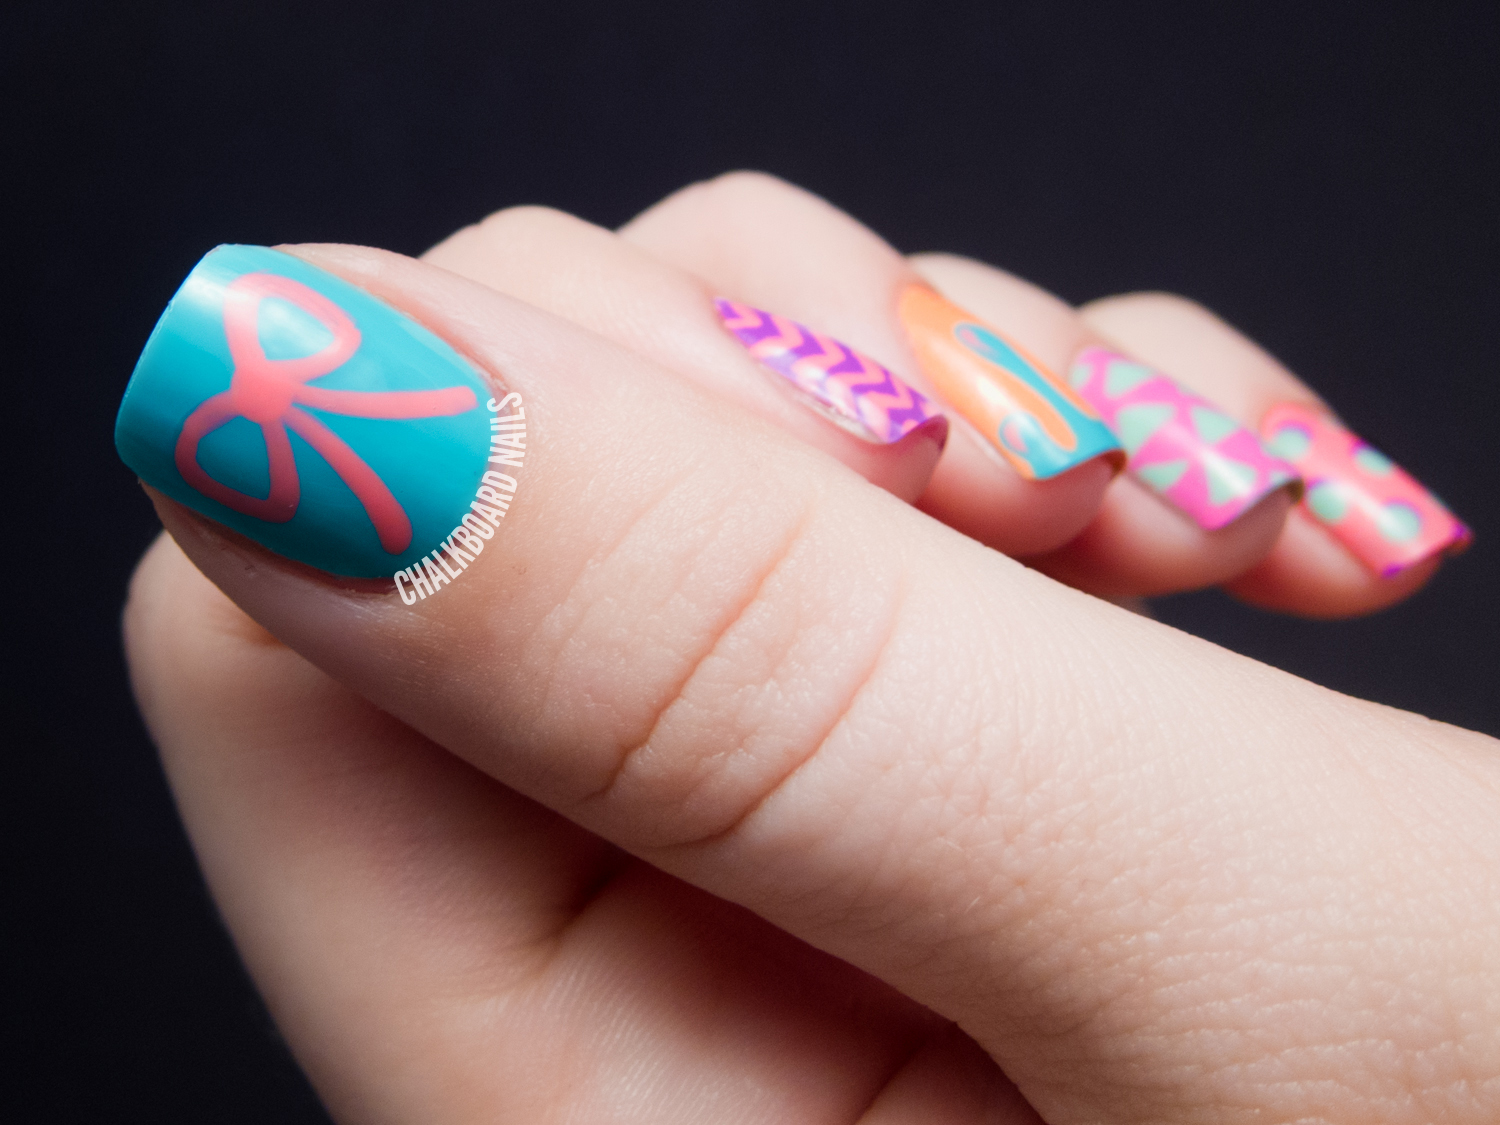 1. "Cute and Quirky Hipster Nail Designs" - wide 3